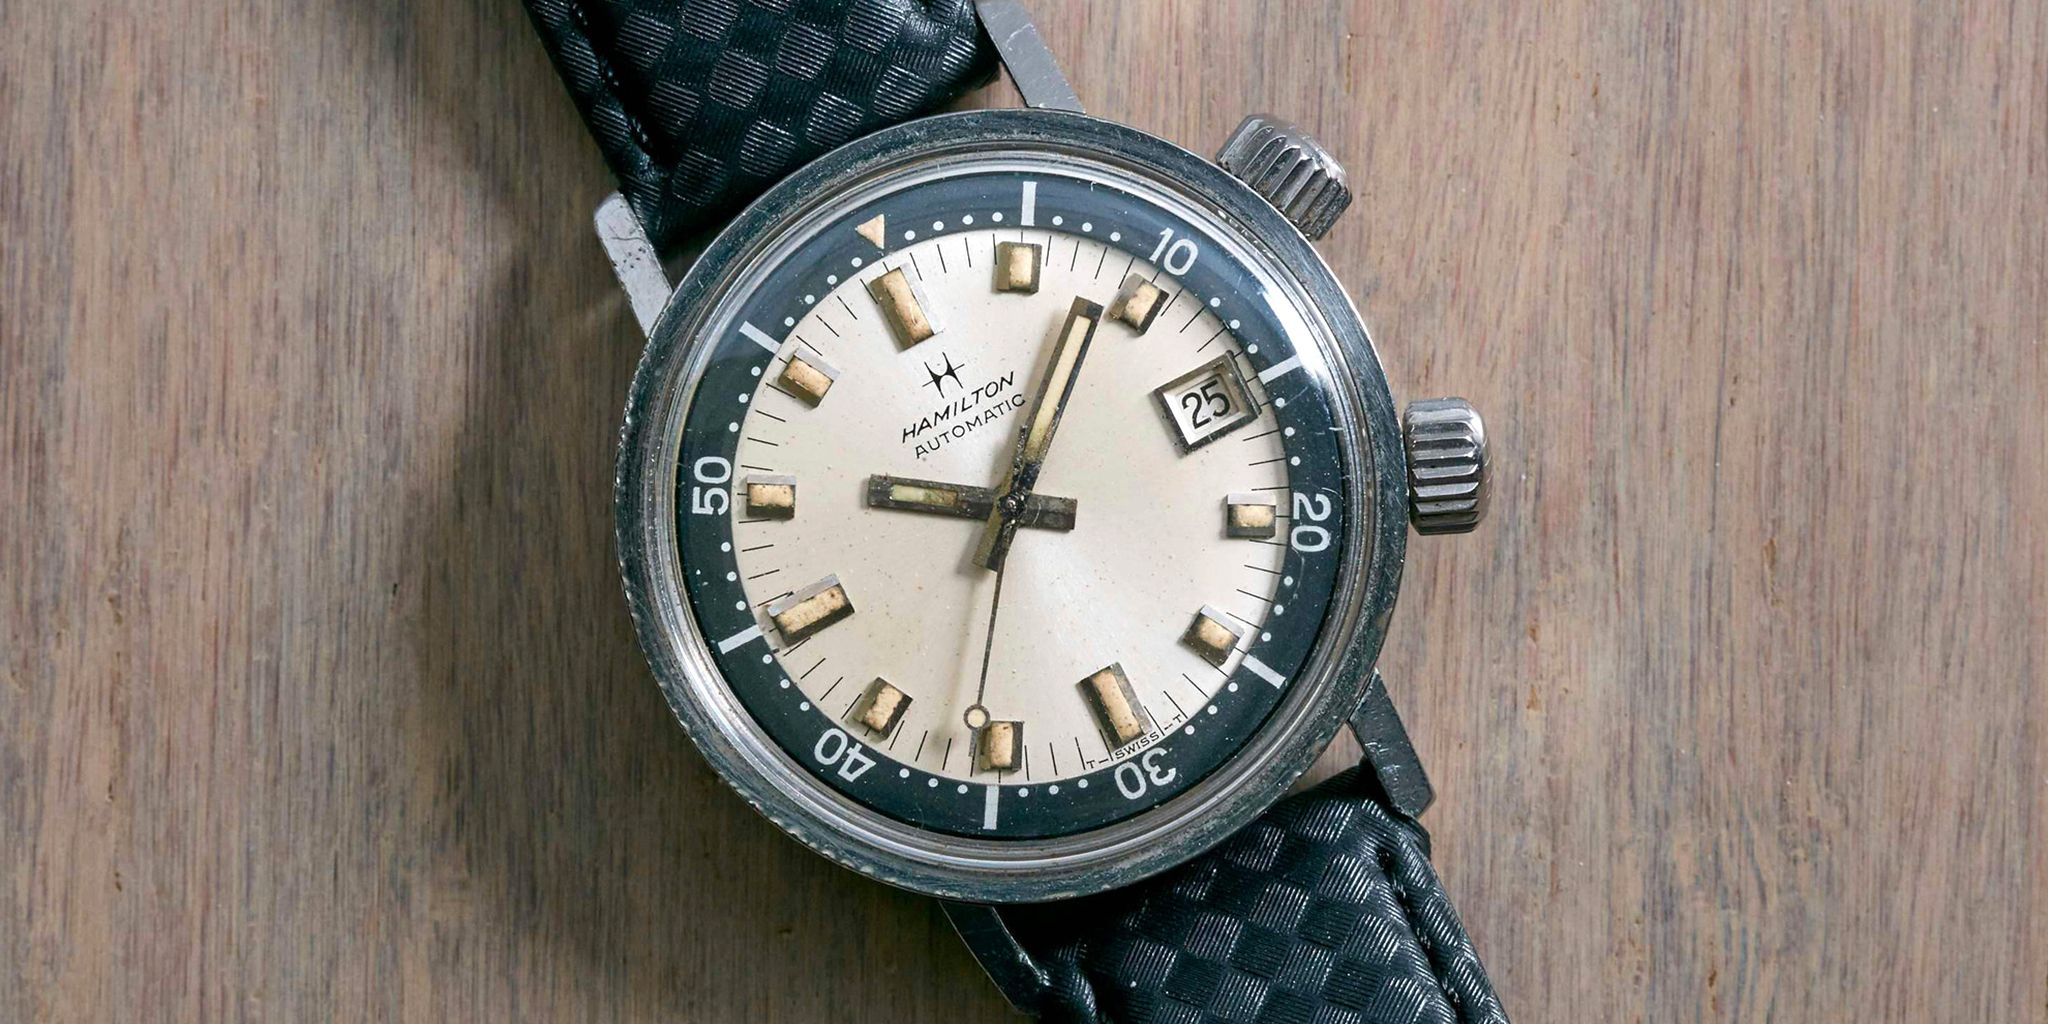 12 Best Vintage Watches For Men 2018 - Stylish Vintage Watches Available Now